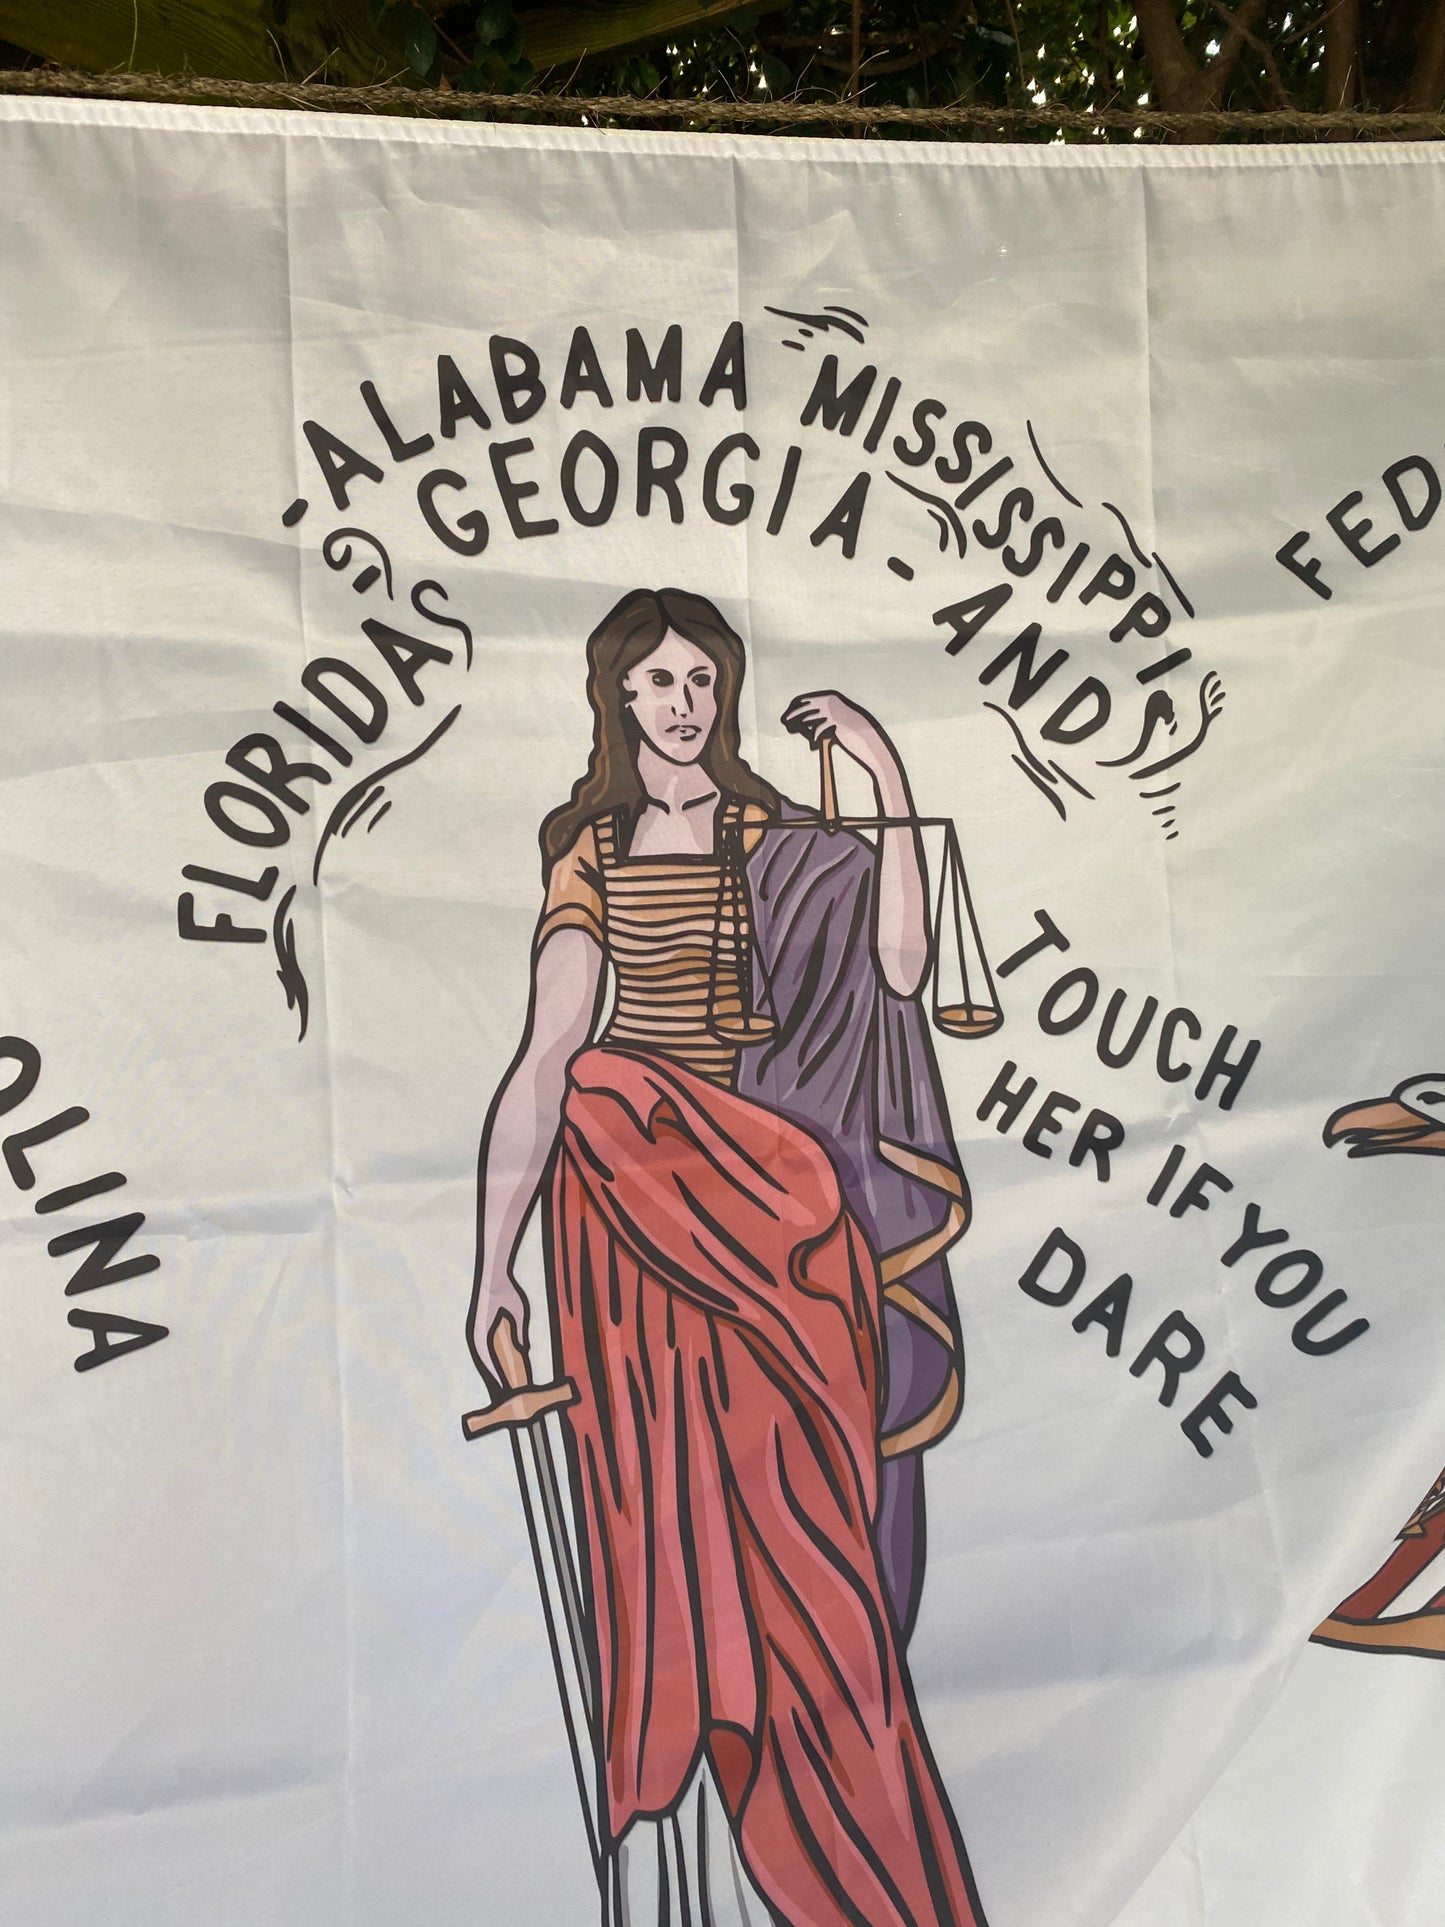 "Touch her if you dare" 1860 Georgia Secession Banner House Flag